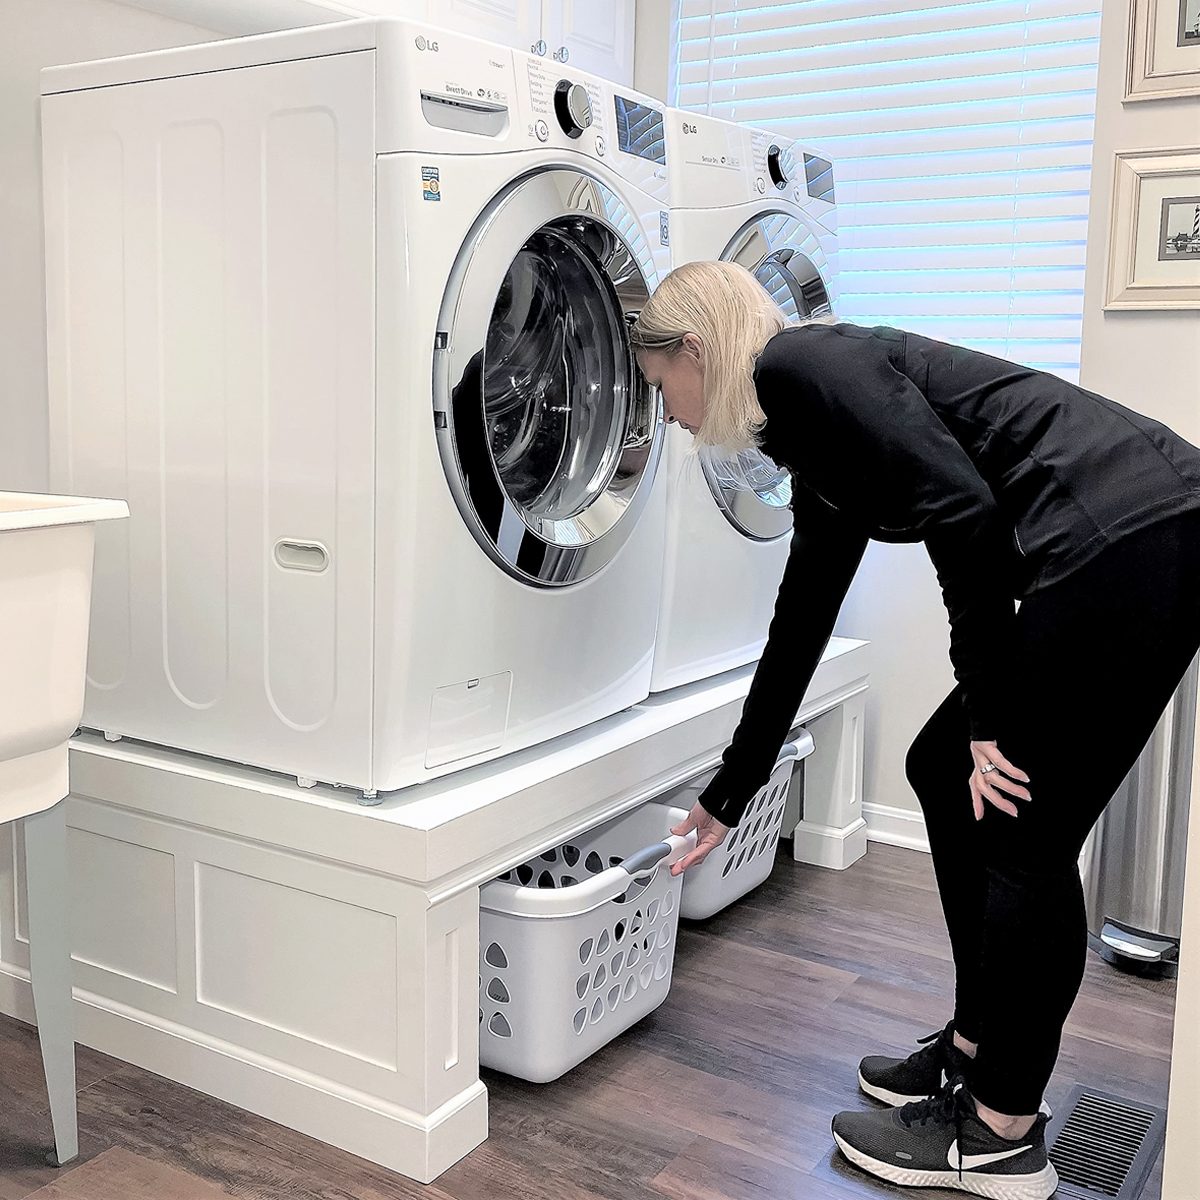 How to install your Samsung washer and dryer pedestals